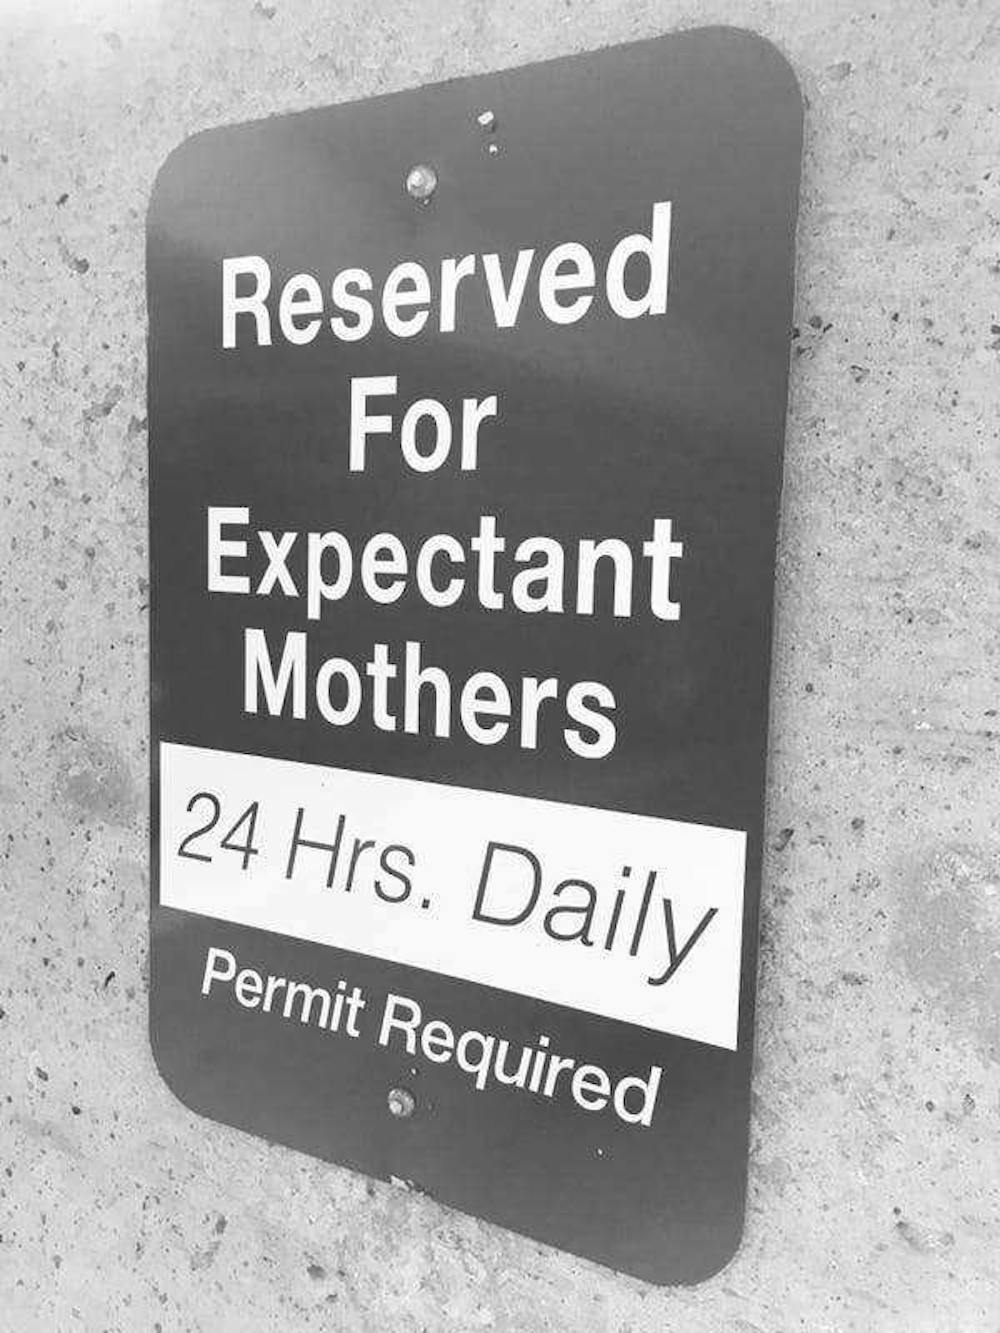 Expectant Mothers Parking Sign at Ball State 